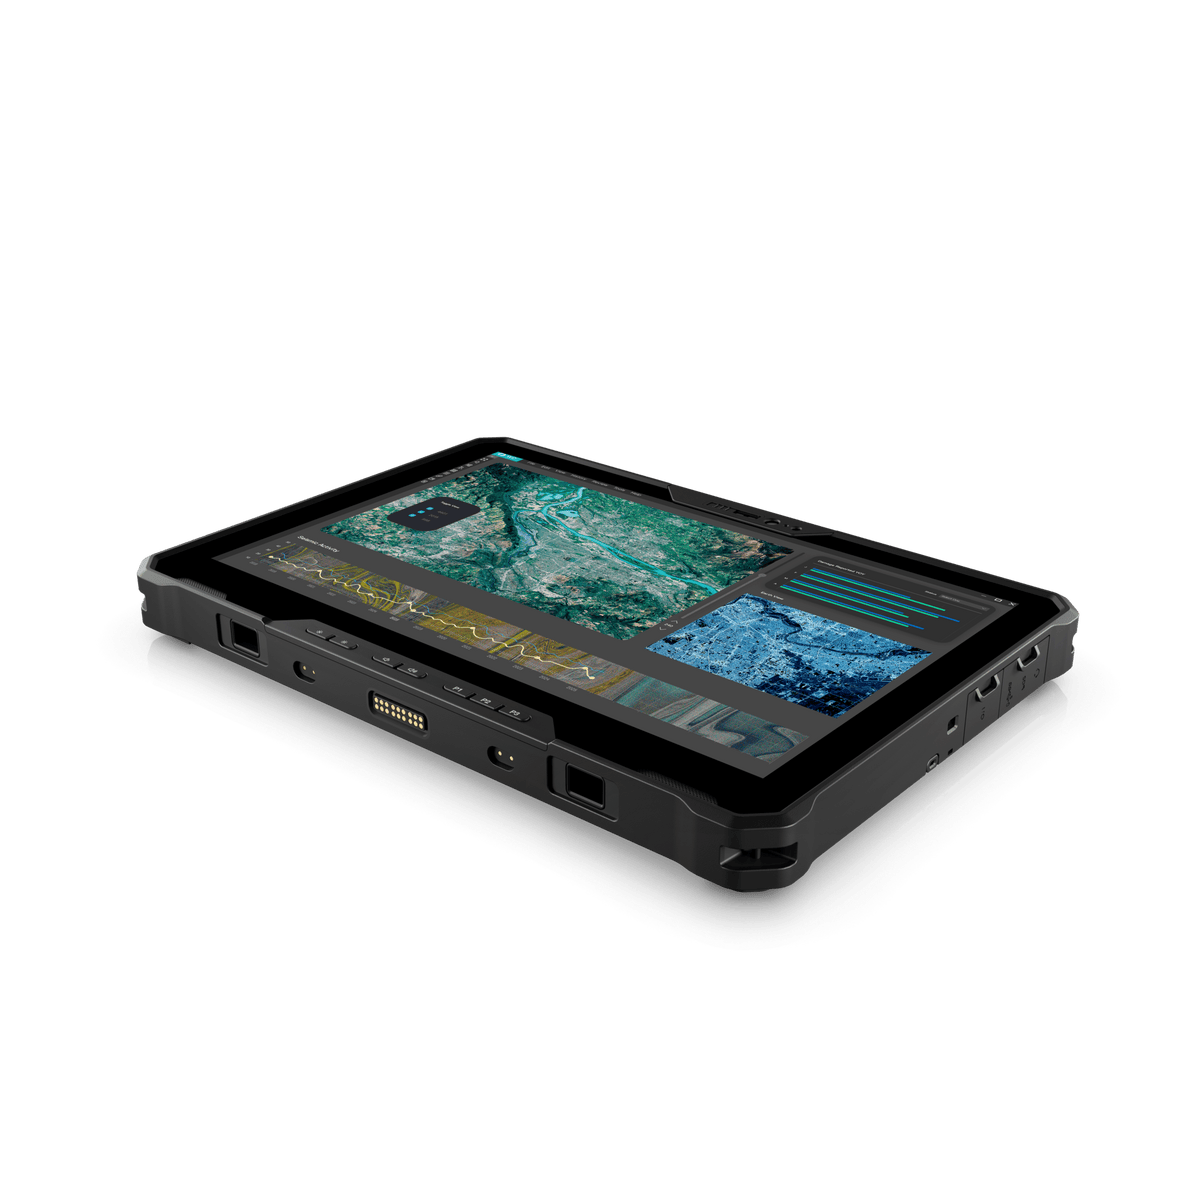 Dell Releases New Extreme Tablet for Professionals Working in Harsh Environments